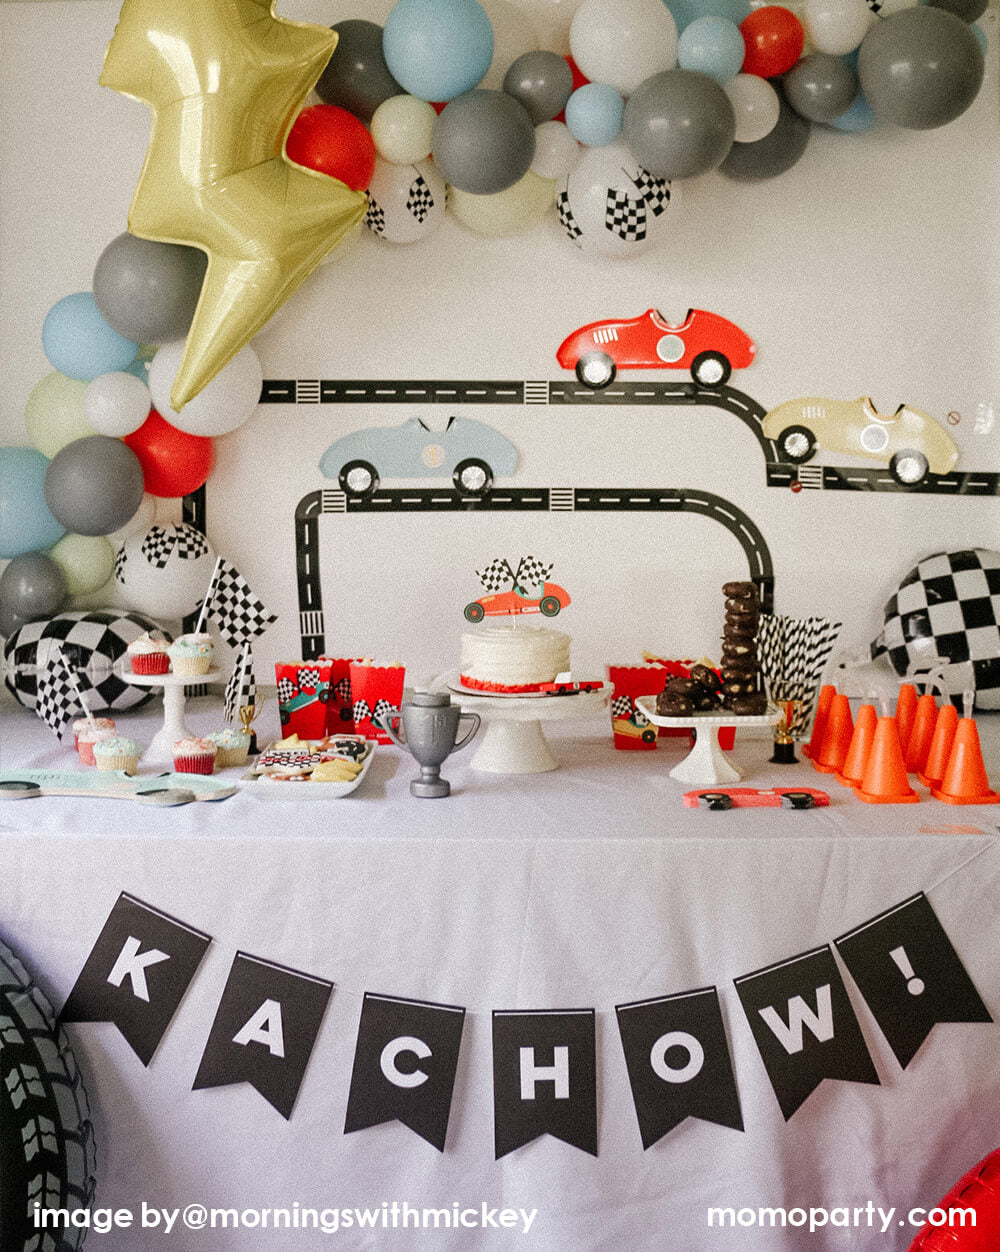 Modern disney race car party, decorated with Road Tape on the wall with Meri Meri Race Car Die-cut Paper Plates, modern pastel themed balloon cloud mix with flag latex balloon and lighting bolt foil balloon, race car topper on a buttercream cake, trophy sipper, mini donuts as tire on a cake stand, red popcorn cups with race car stickers next to the main cake, black letter banner spelled as "kachow!" hanging in front of the table. A modern Car themed Birthday Party at home by Mornings-with-Mickey